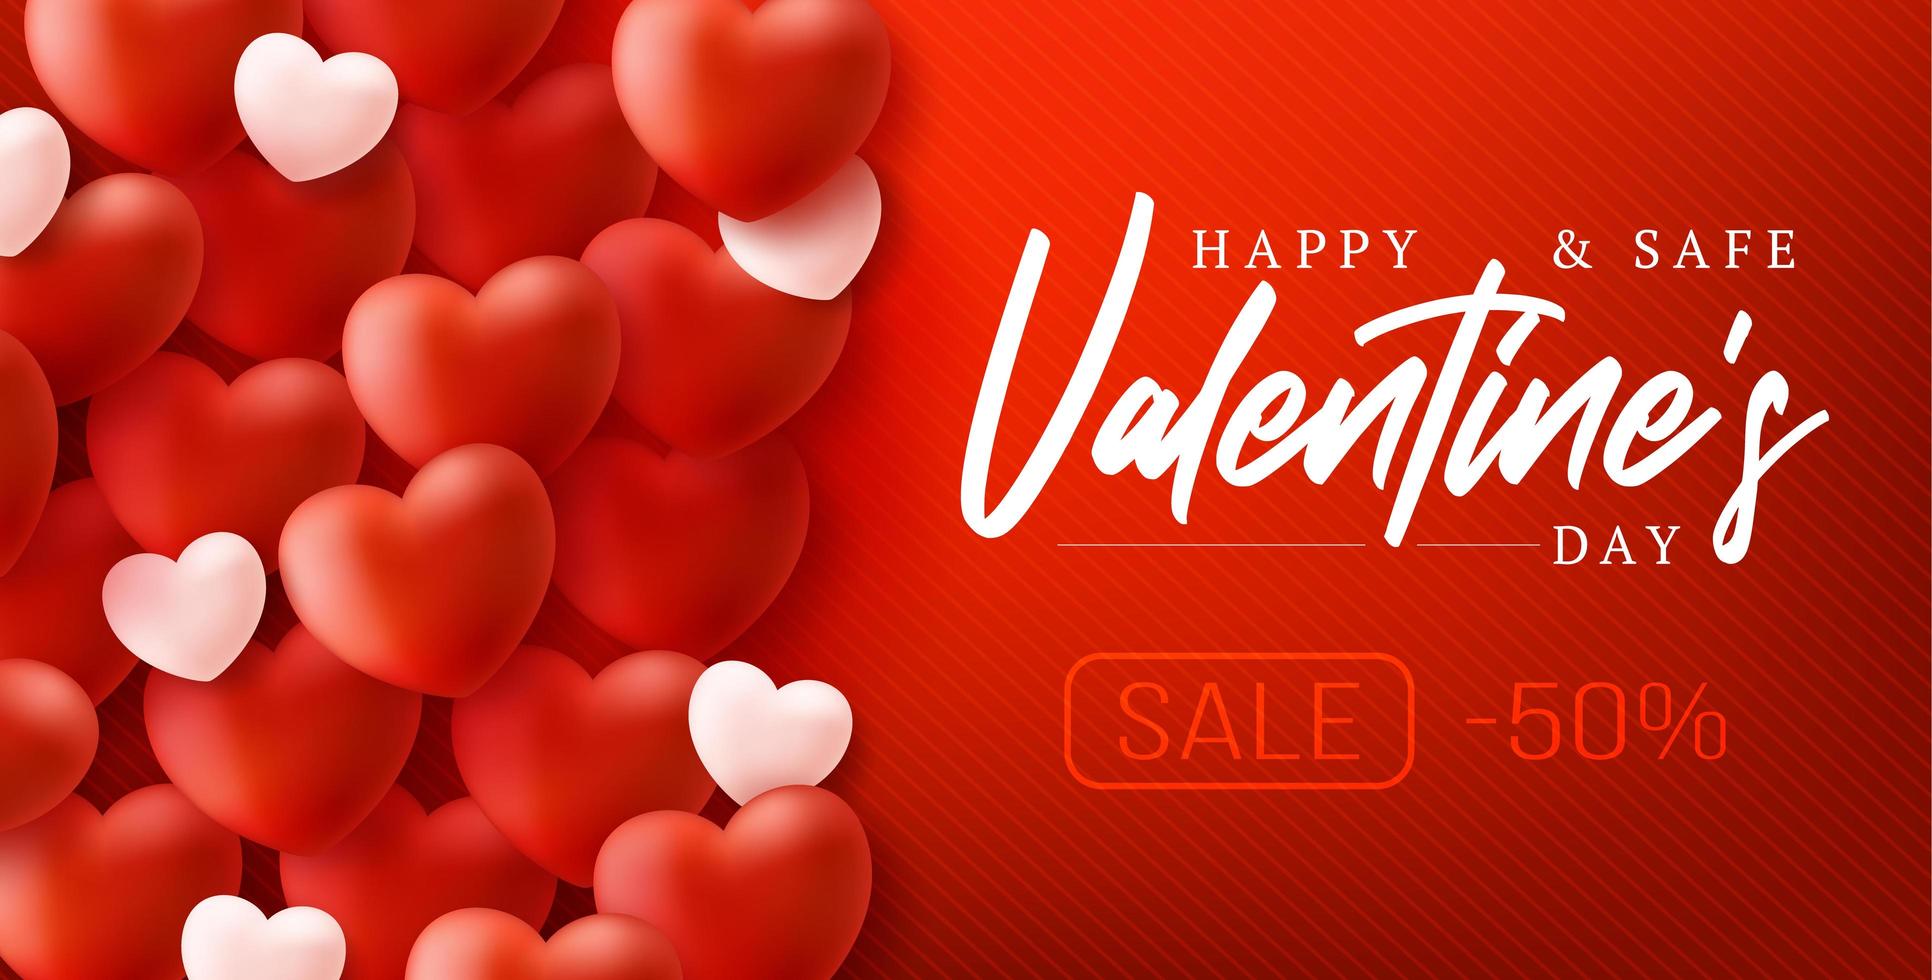 Happy and safe Valentines day sale background vector